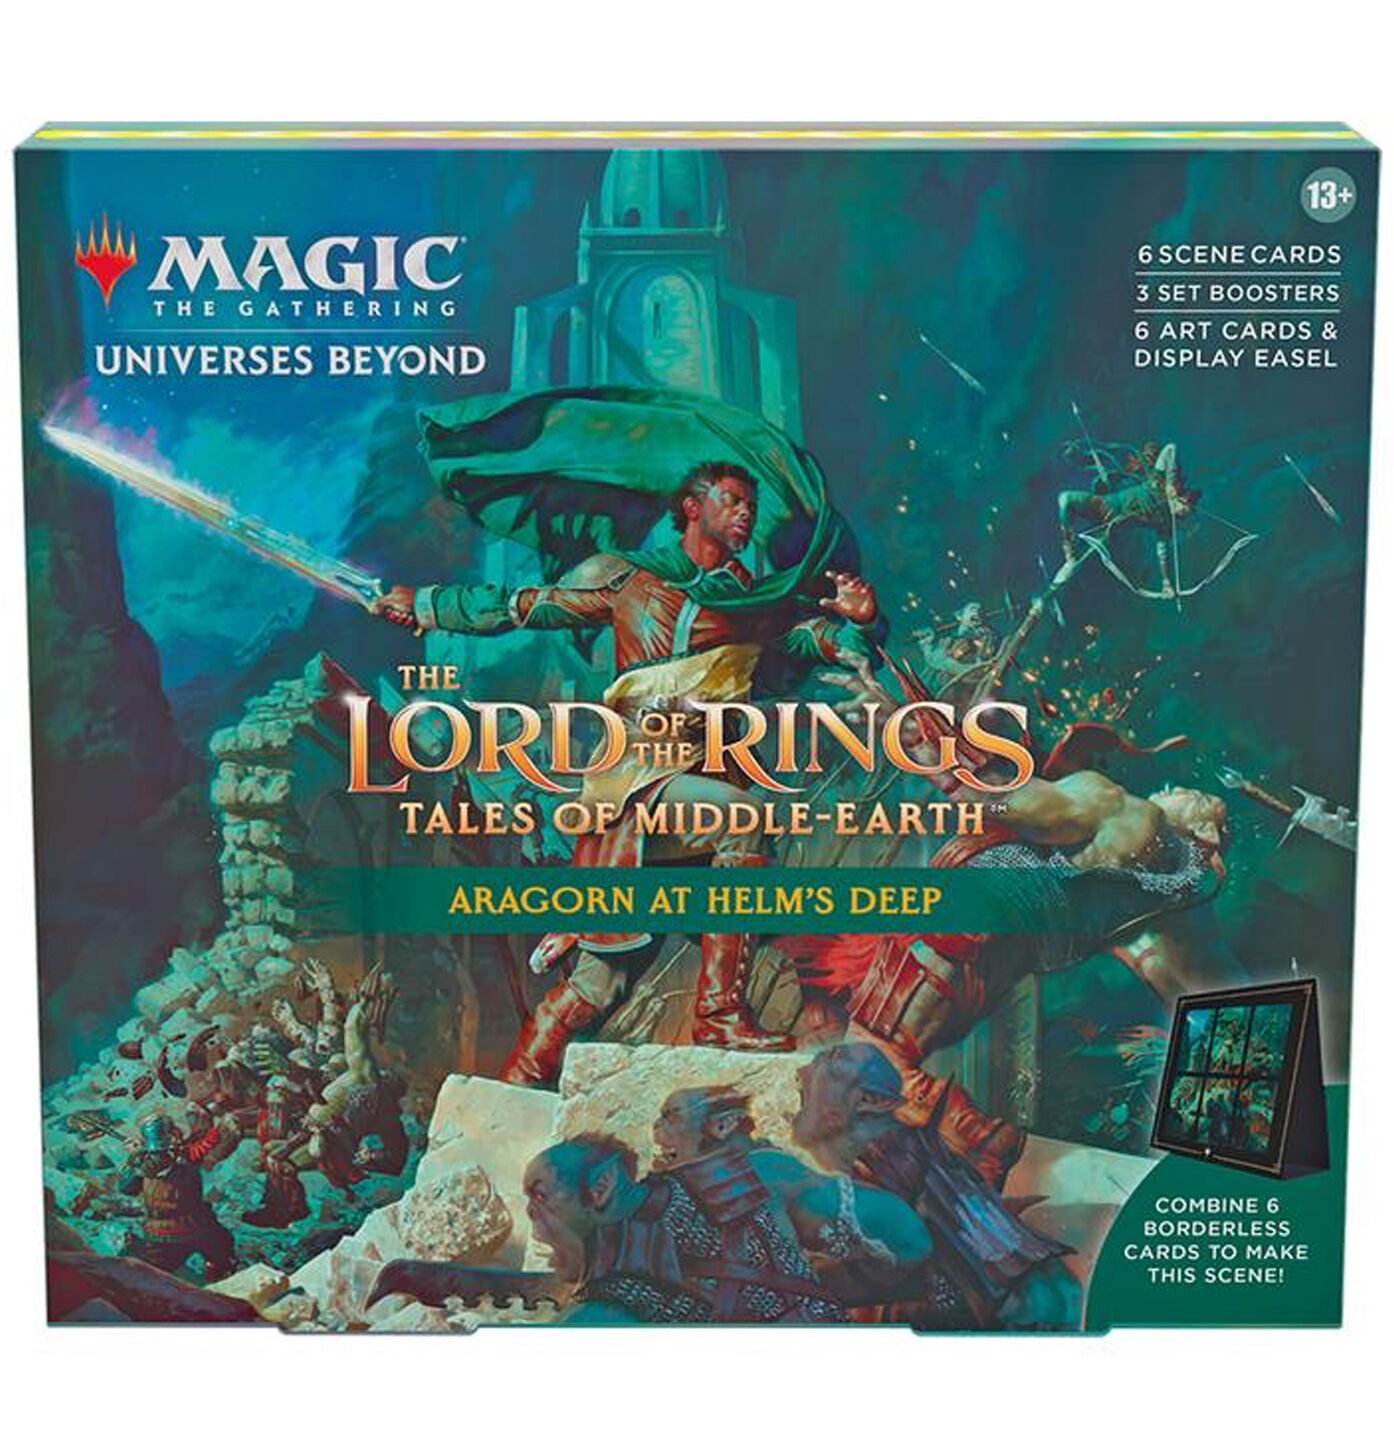 The Lord of the Rings: Tales of Middle-earth Scene Box Aragon at Helms Deep - Magic the Gathering - EN